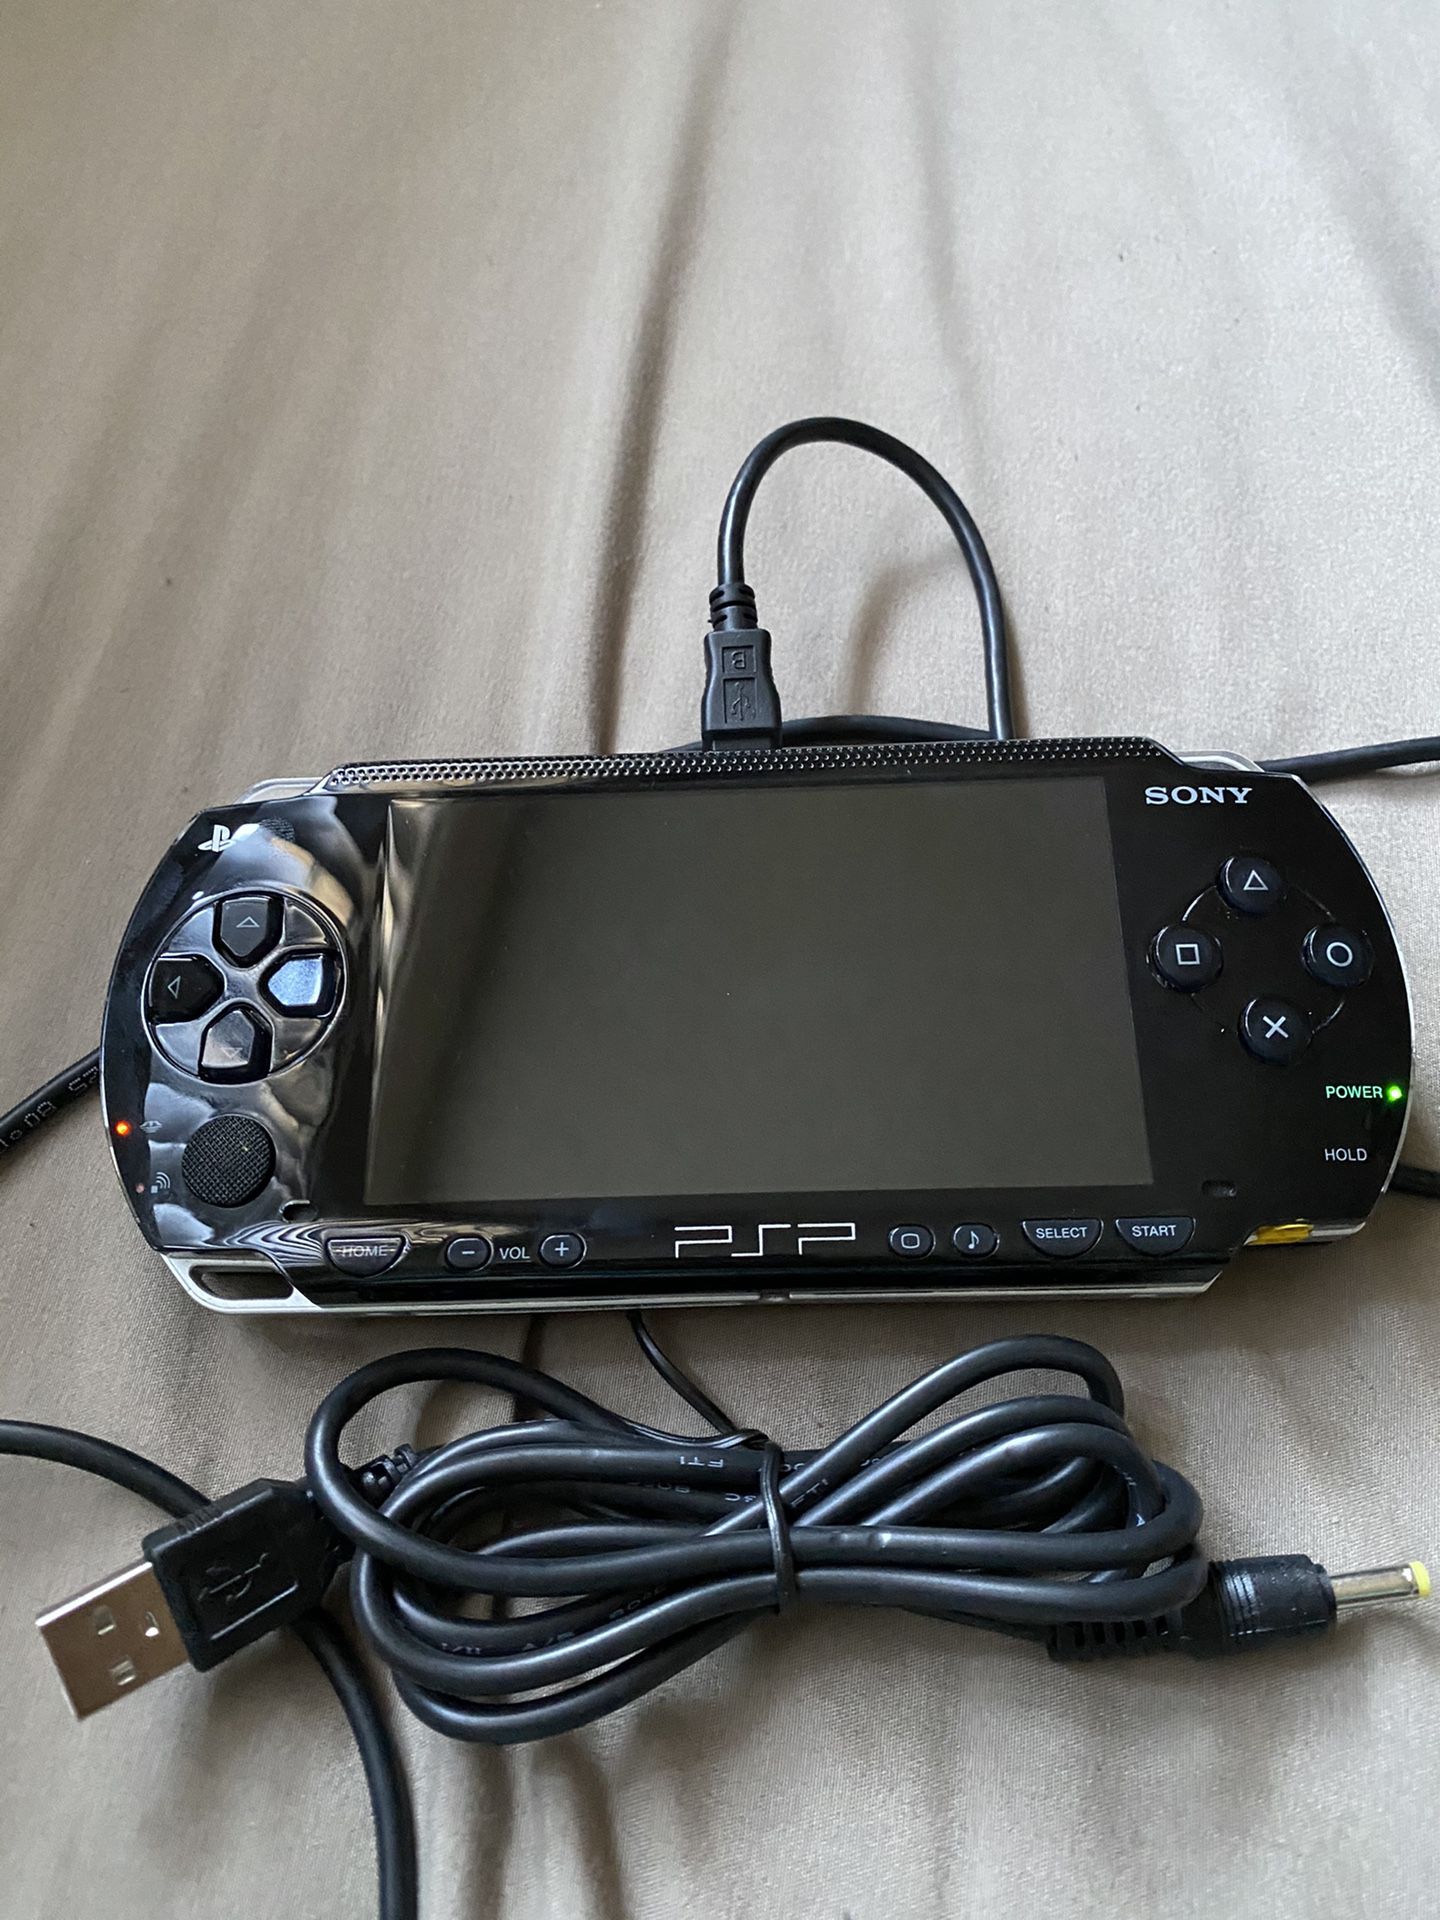 MODDED PSP 35+PSP GAMES 1600 RETROS.PSP IS IN GREAT CONDITION HAS CHARGER.$130 NOTHING LESS.